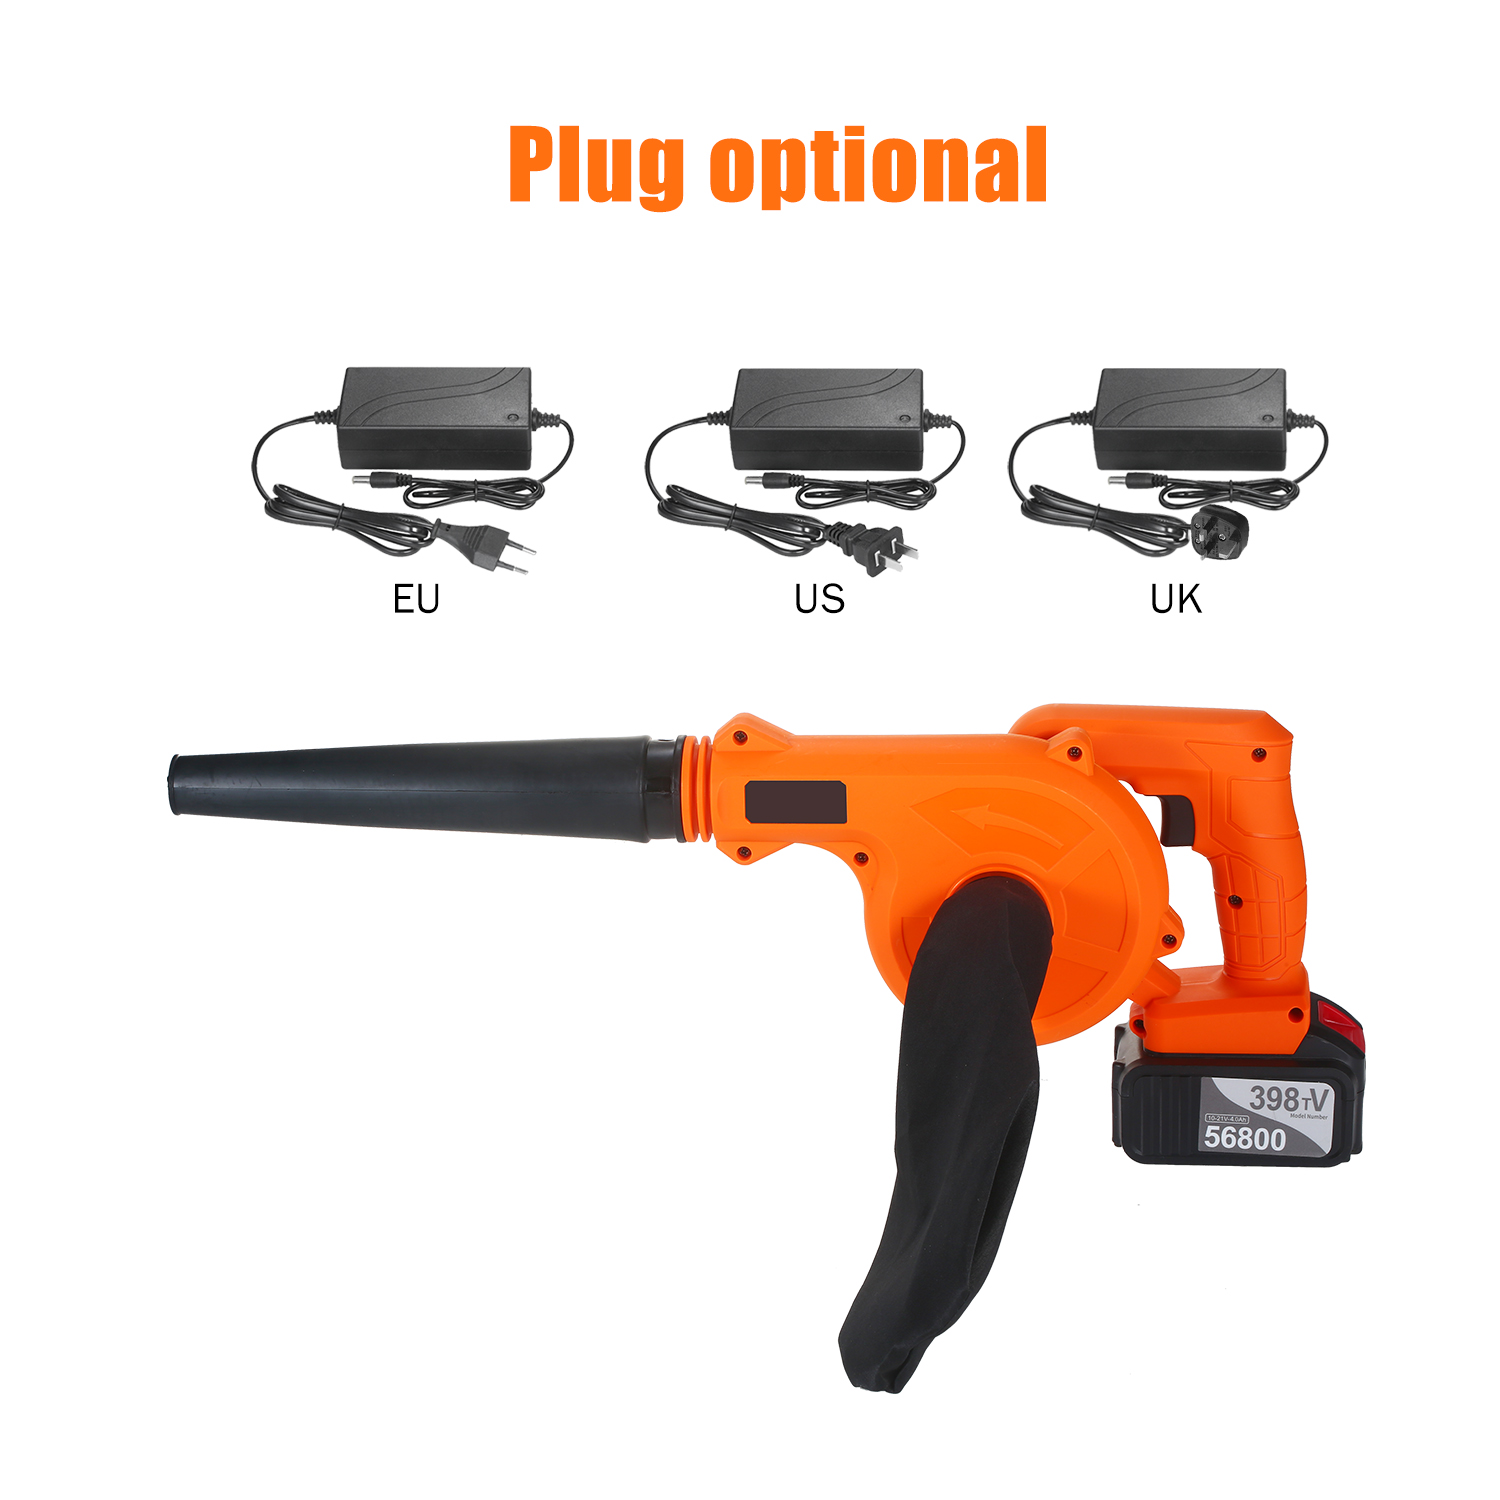 Cordless Leaf Blower Vacuum 21V 4.0 Ah Lithium Battery Powered Electric 2 in 1 Blower & Vacuum For Clearing Dust Leaf Snow